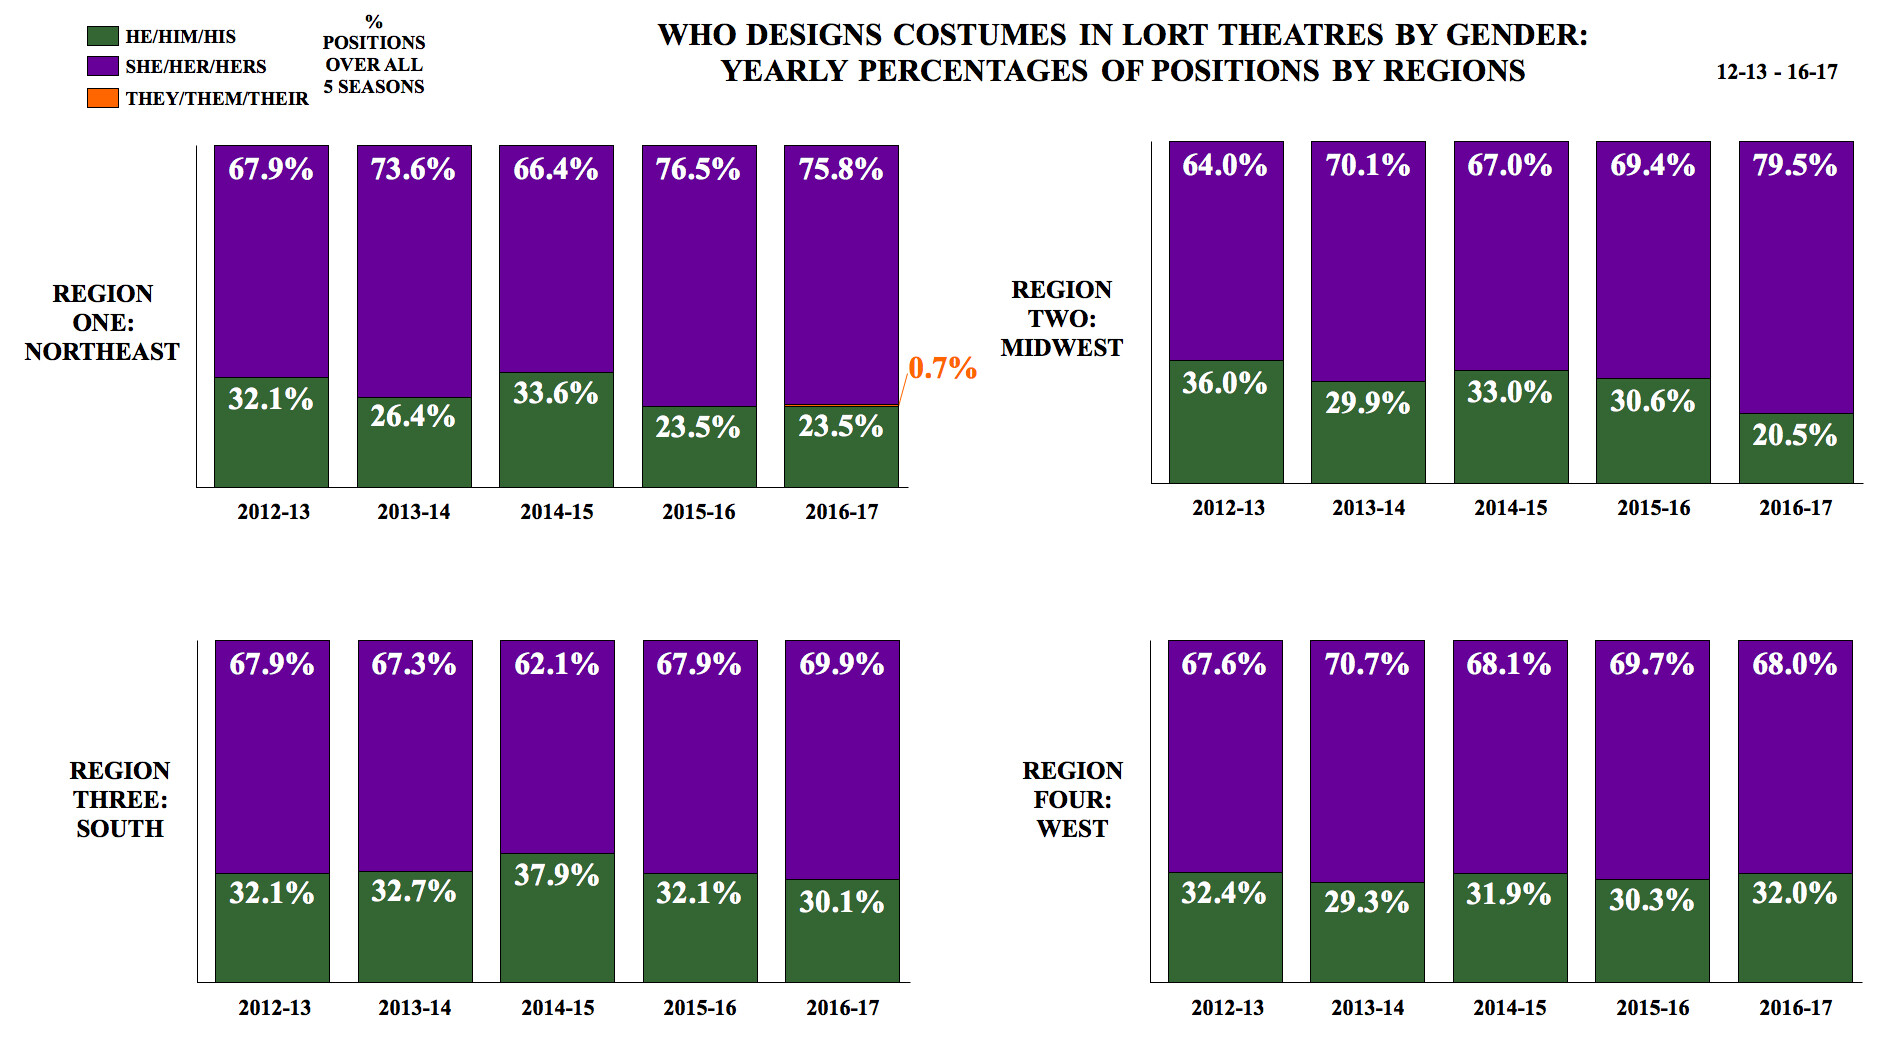 Who Designs Costumes in LORT Theatres by Gender: Yearly Percentages of Positions